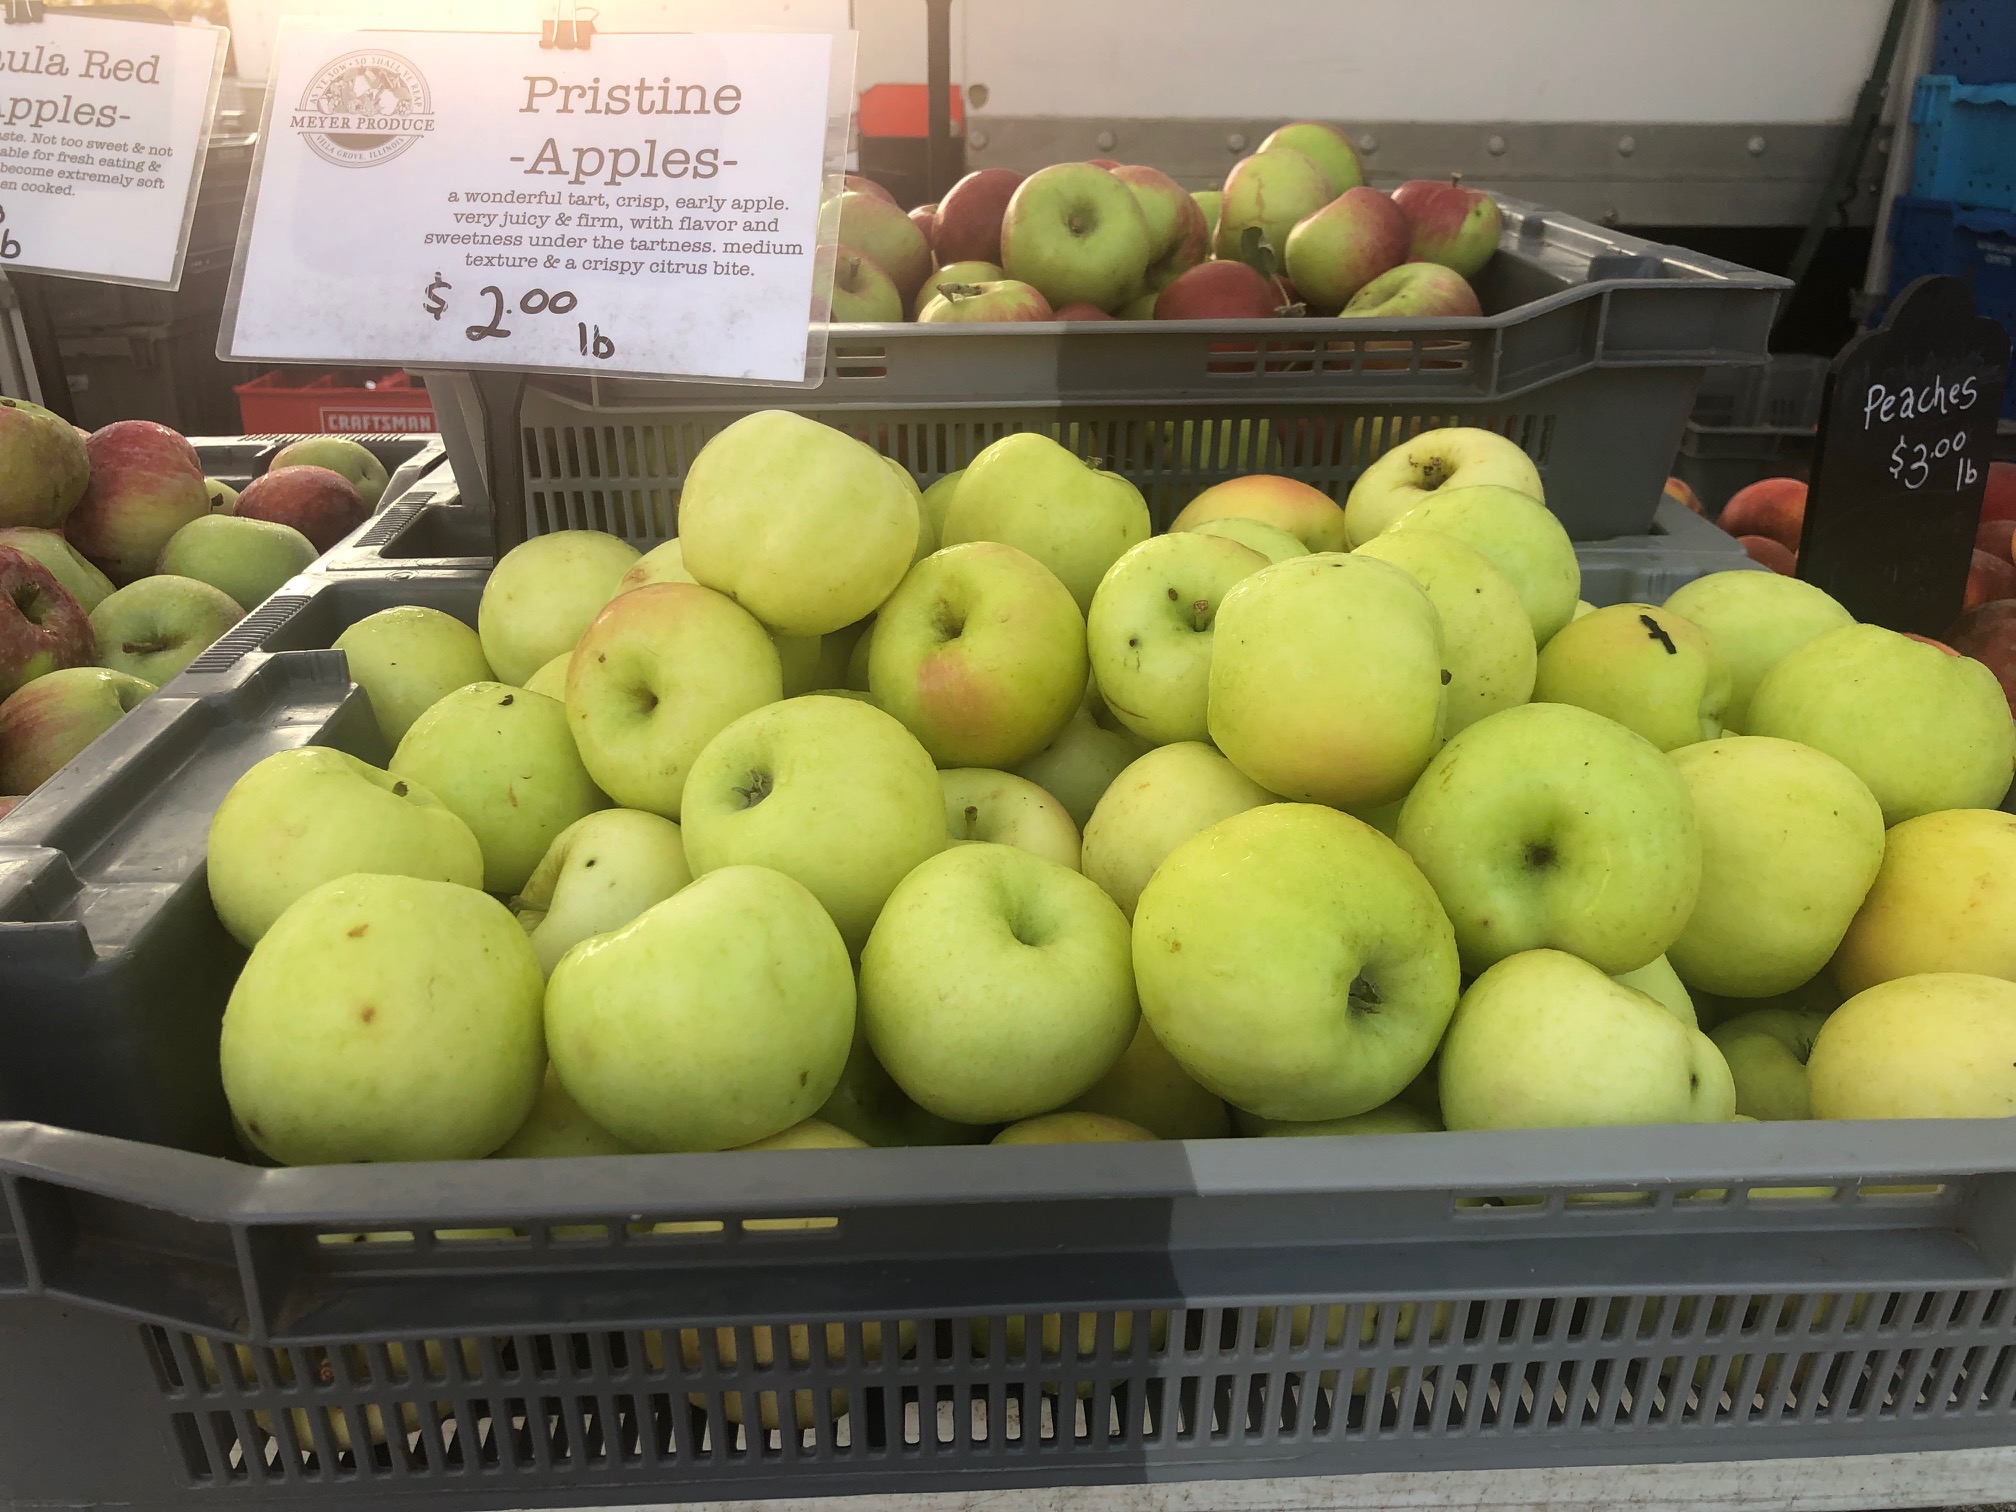 In a large gray box, there are yellow apples waiting to be sold at the farmers' market. Photo by Alyssa Buckley.